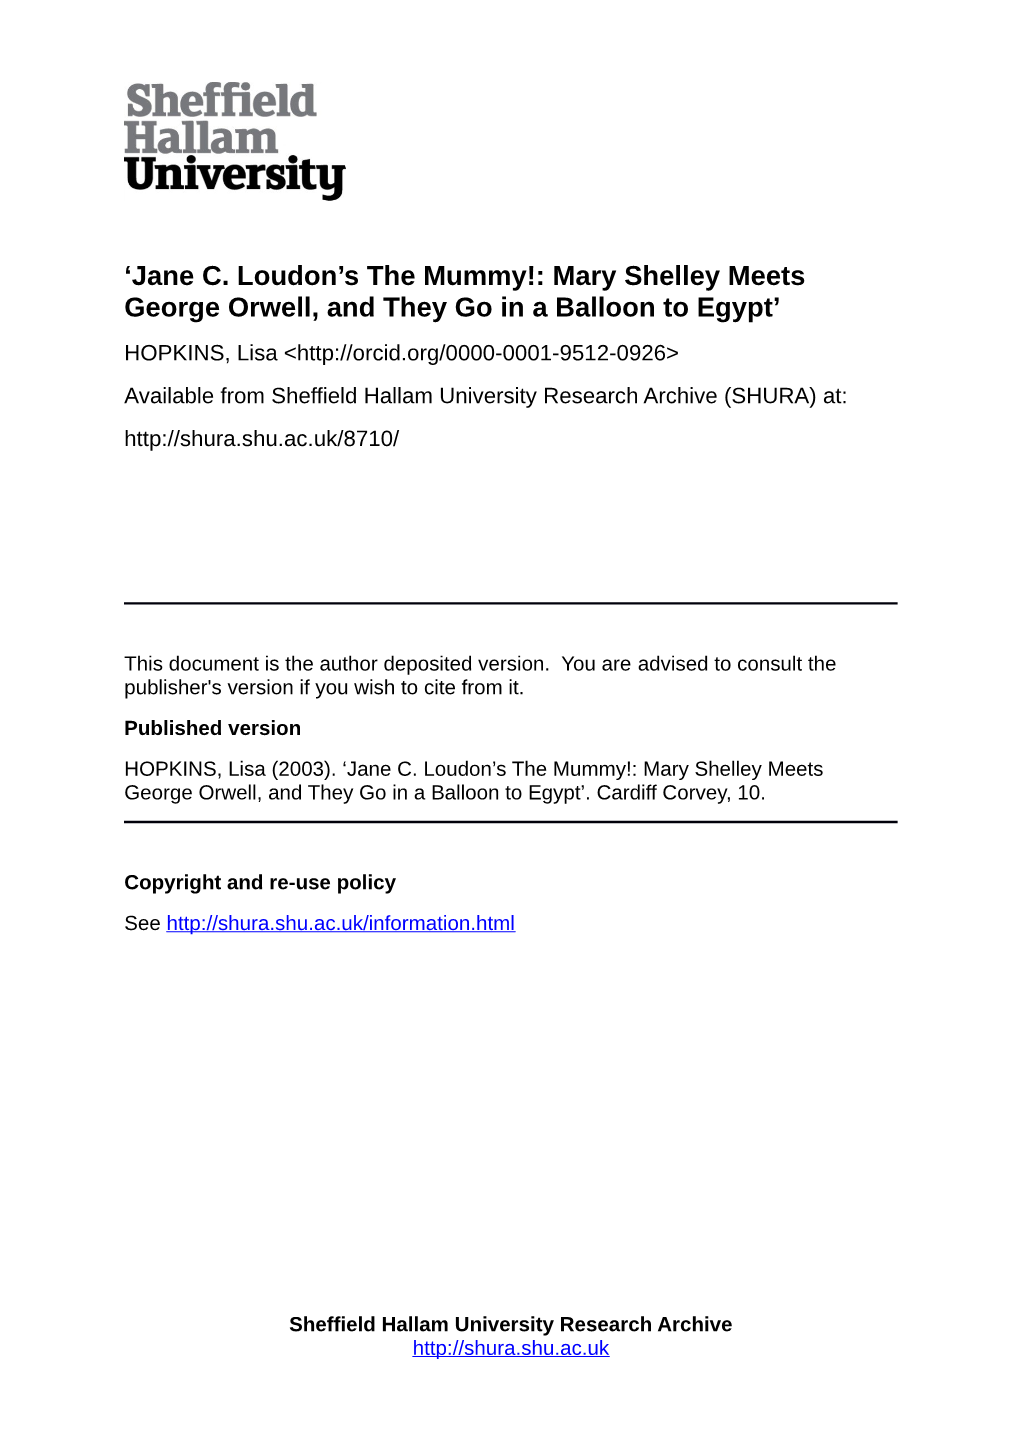 Jane C. Loudon's the Mummy!: Mary Shelley Meets George Orwell, And